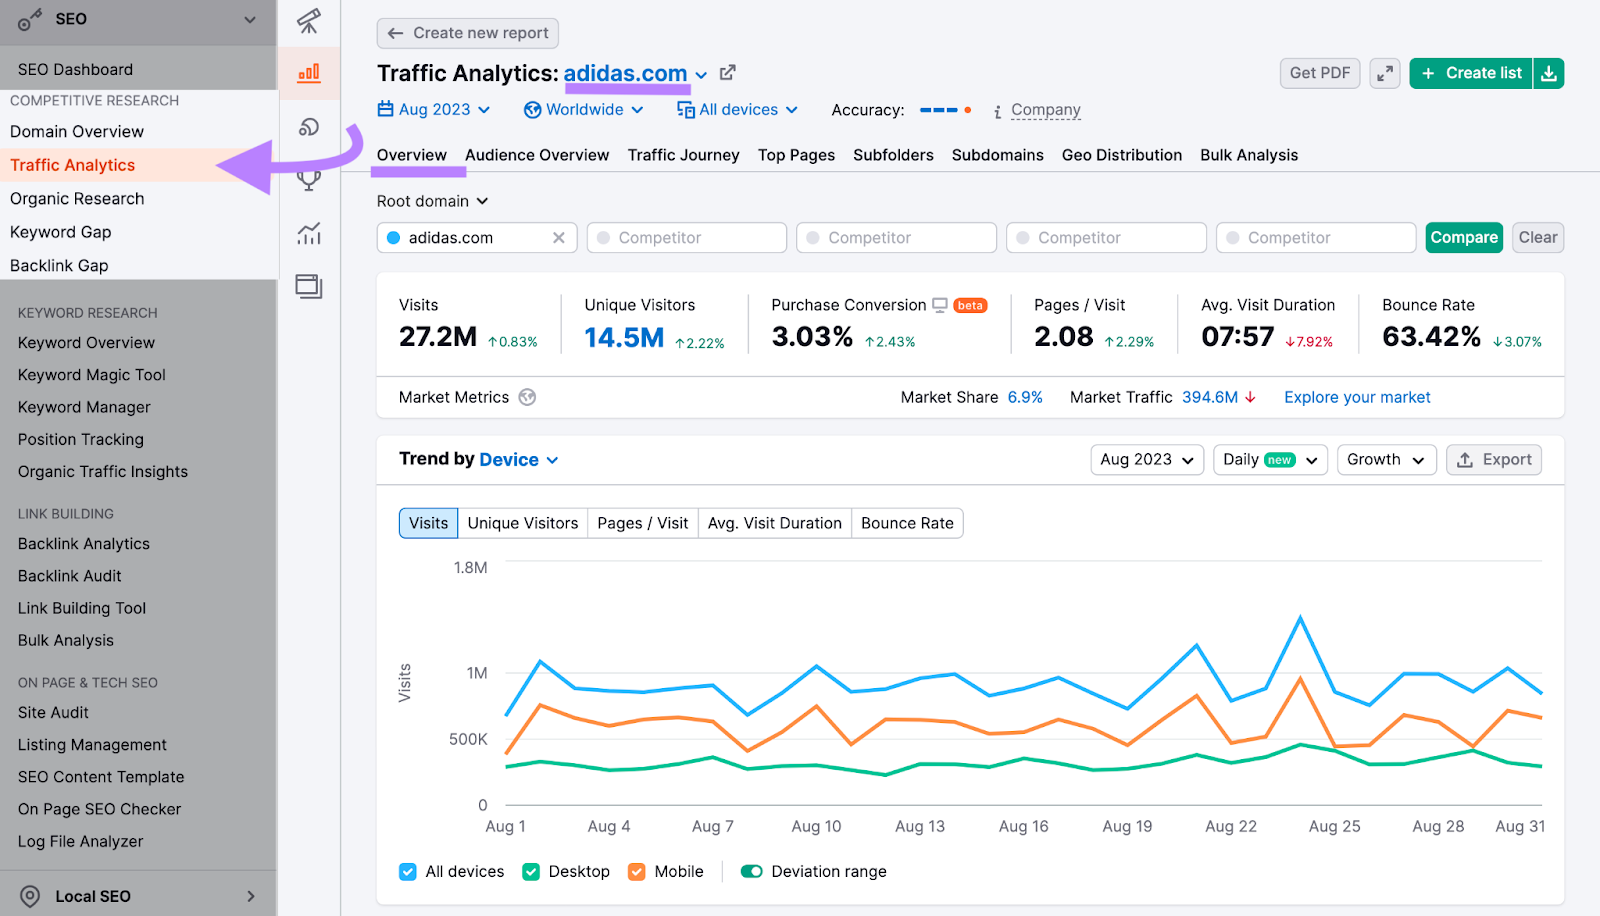 Traffic Analytics overview dashboard for "adidas.com"